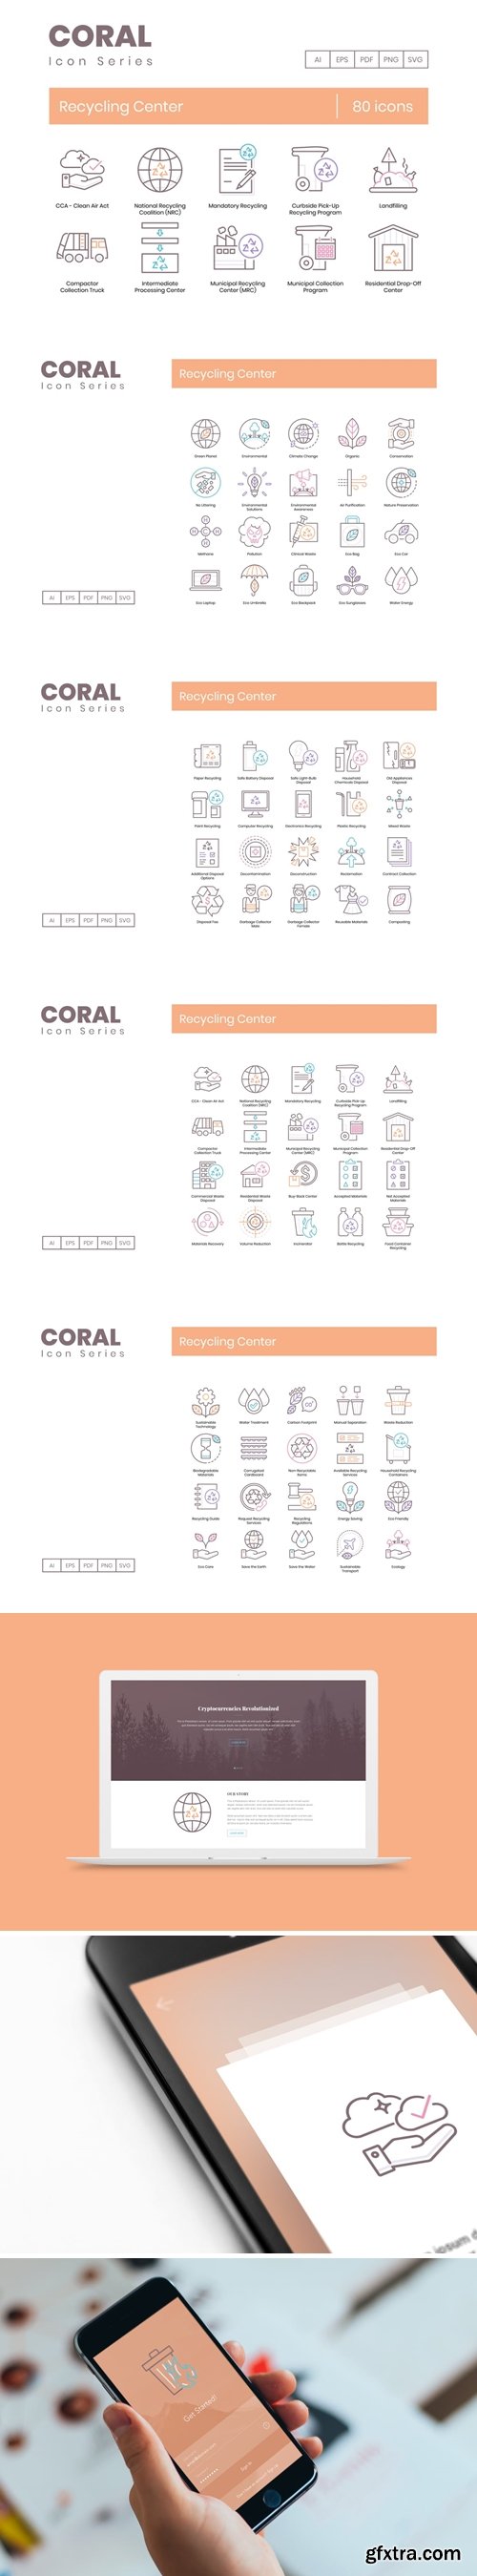 80 Recycling Center Icons - Coral Series